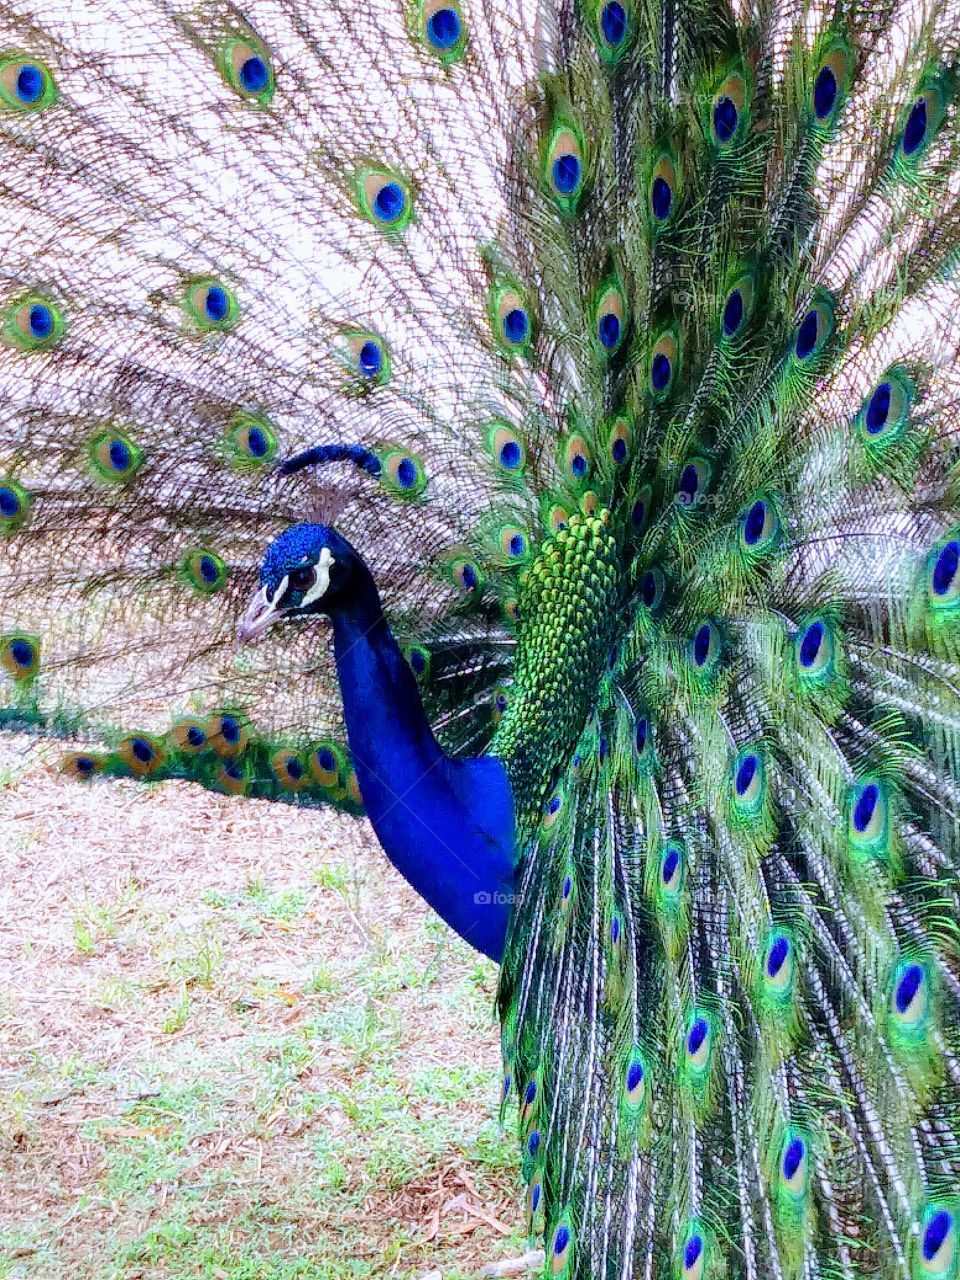 peacocks were showing off today at the zoo.